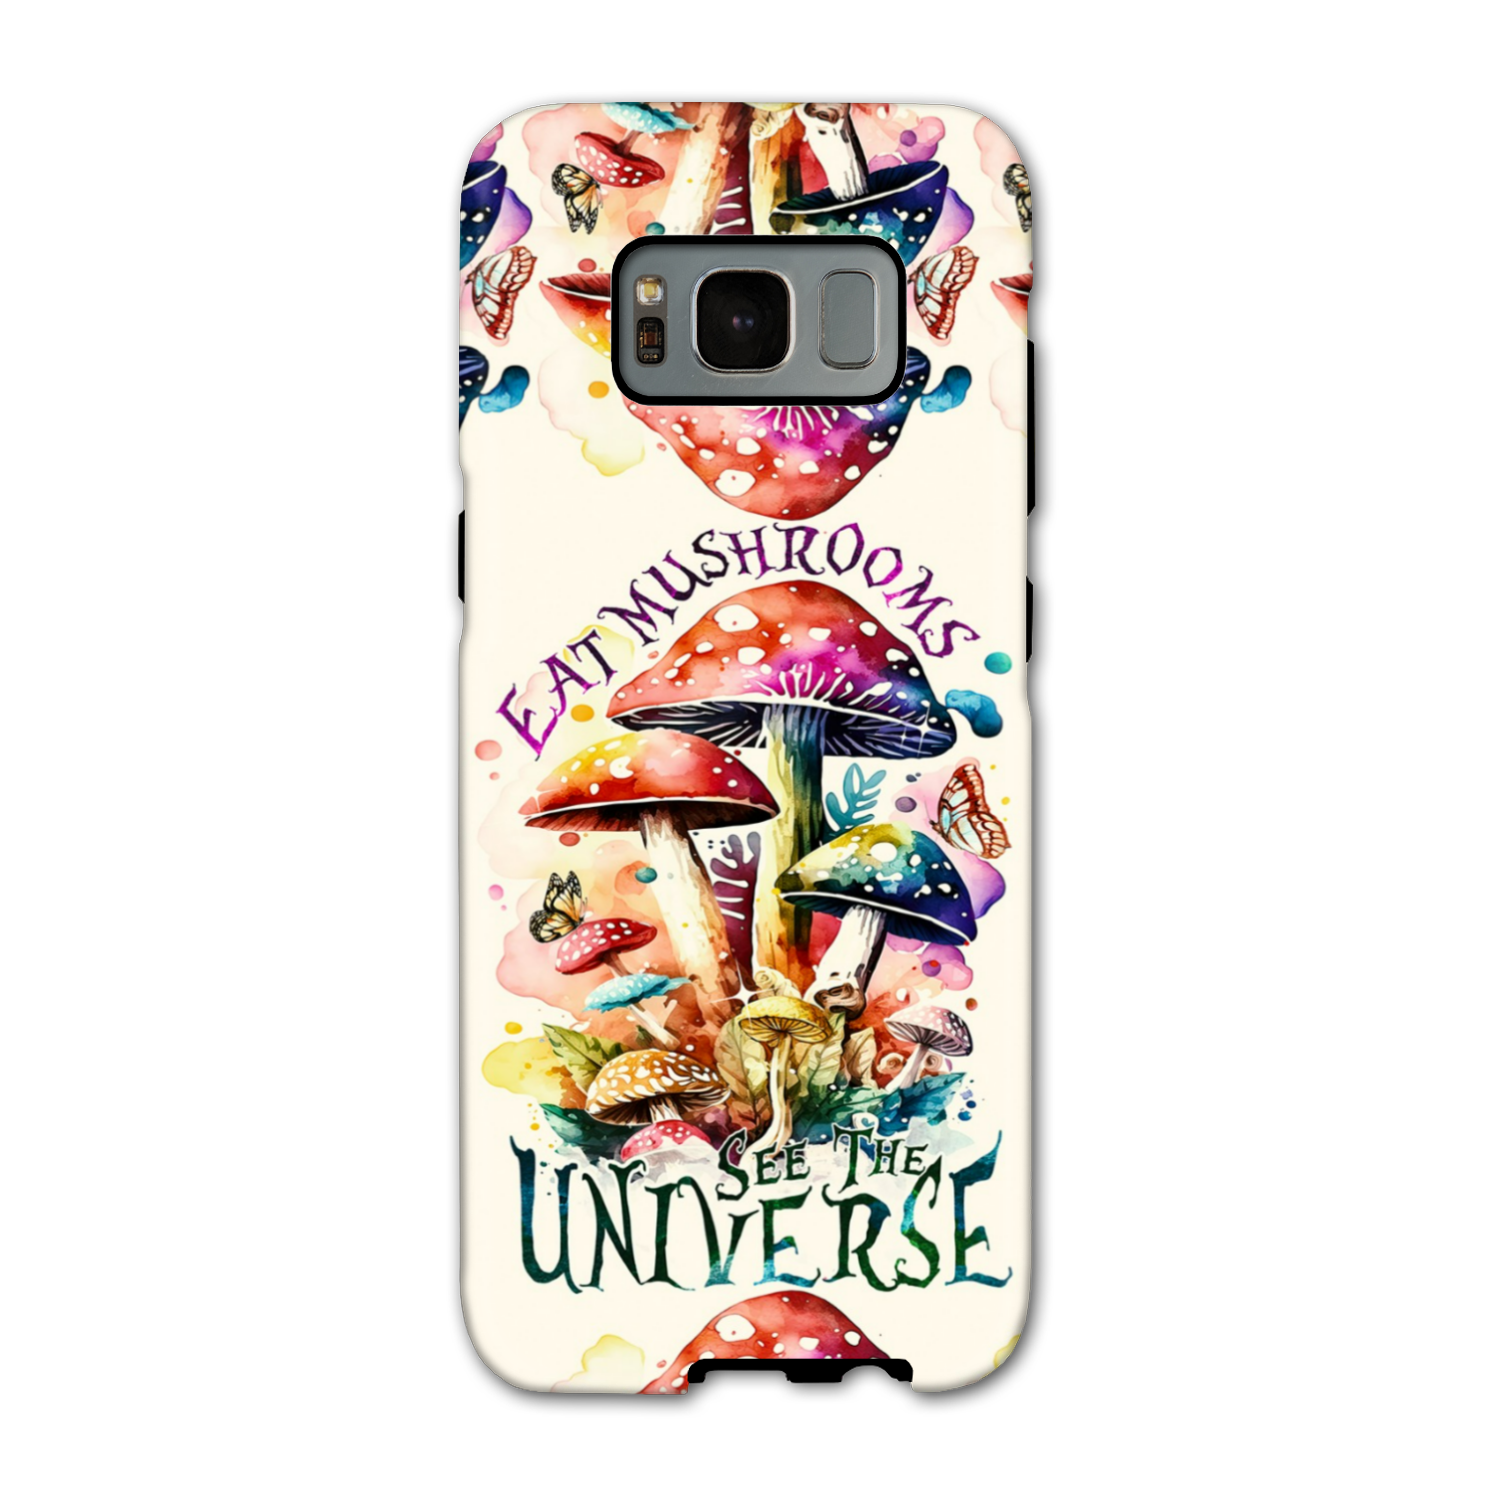 EAT MUSHROOMS SEE THE UNIVERSE PHONE CASE - TY2002231